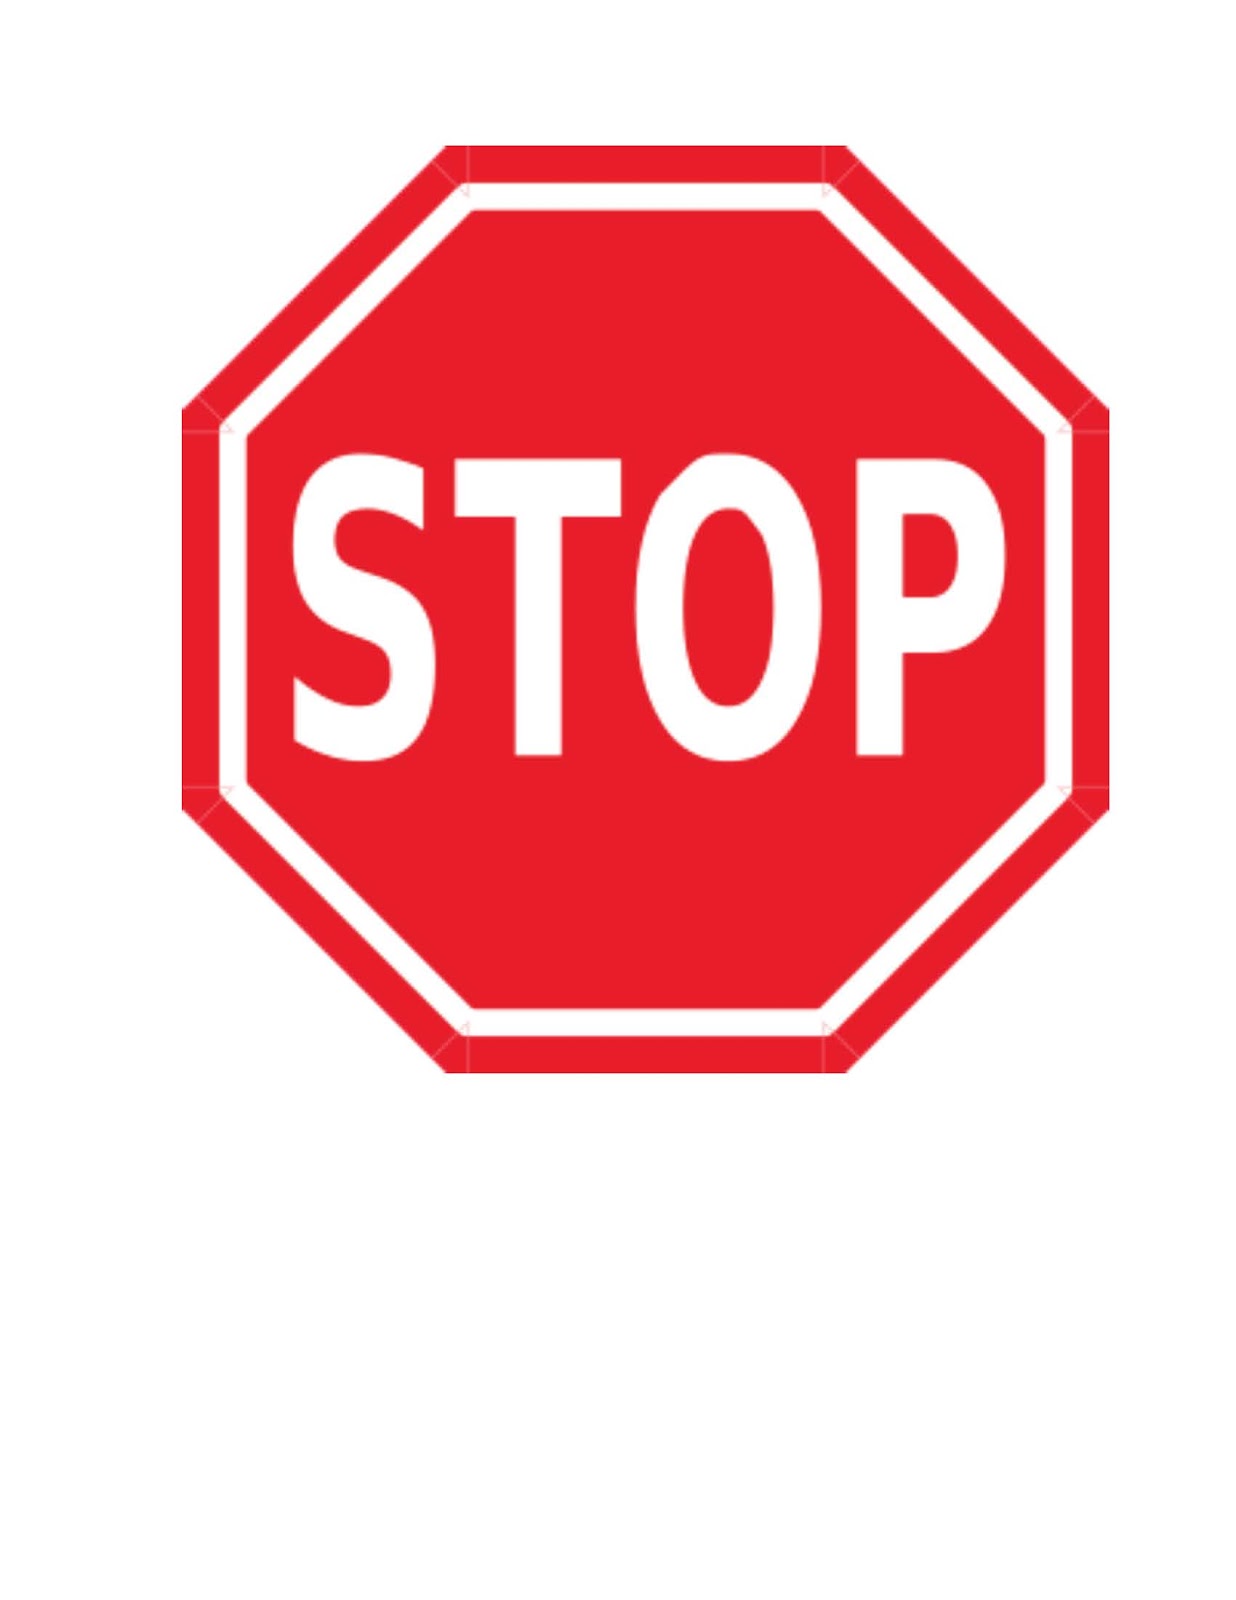 Stop sign clipart images